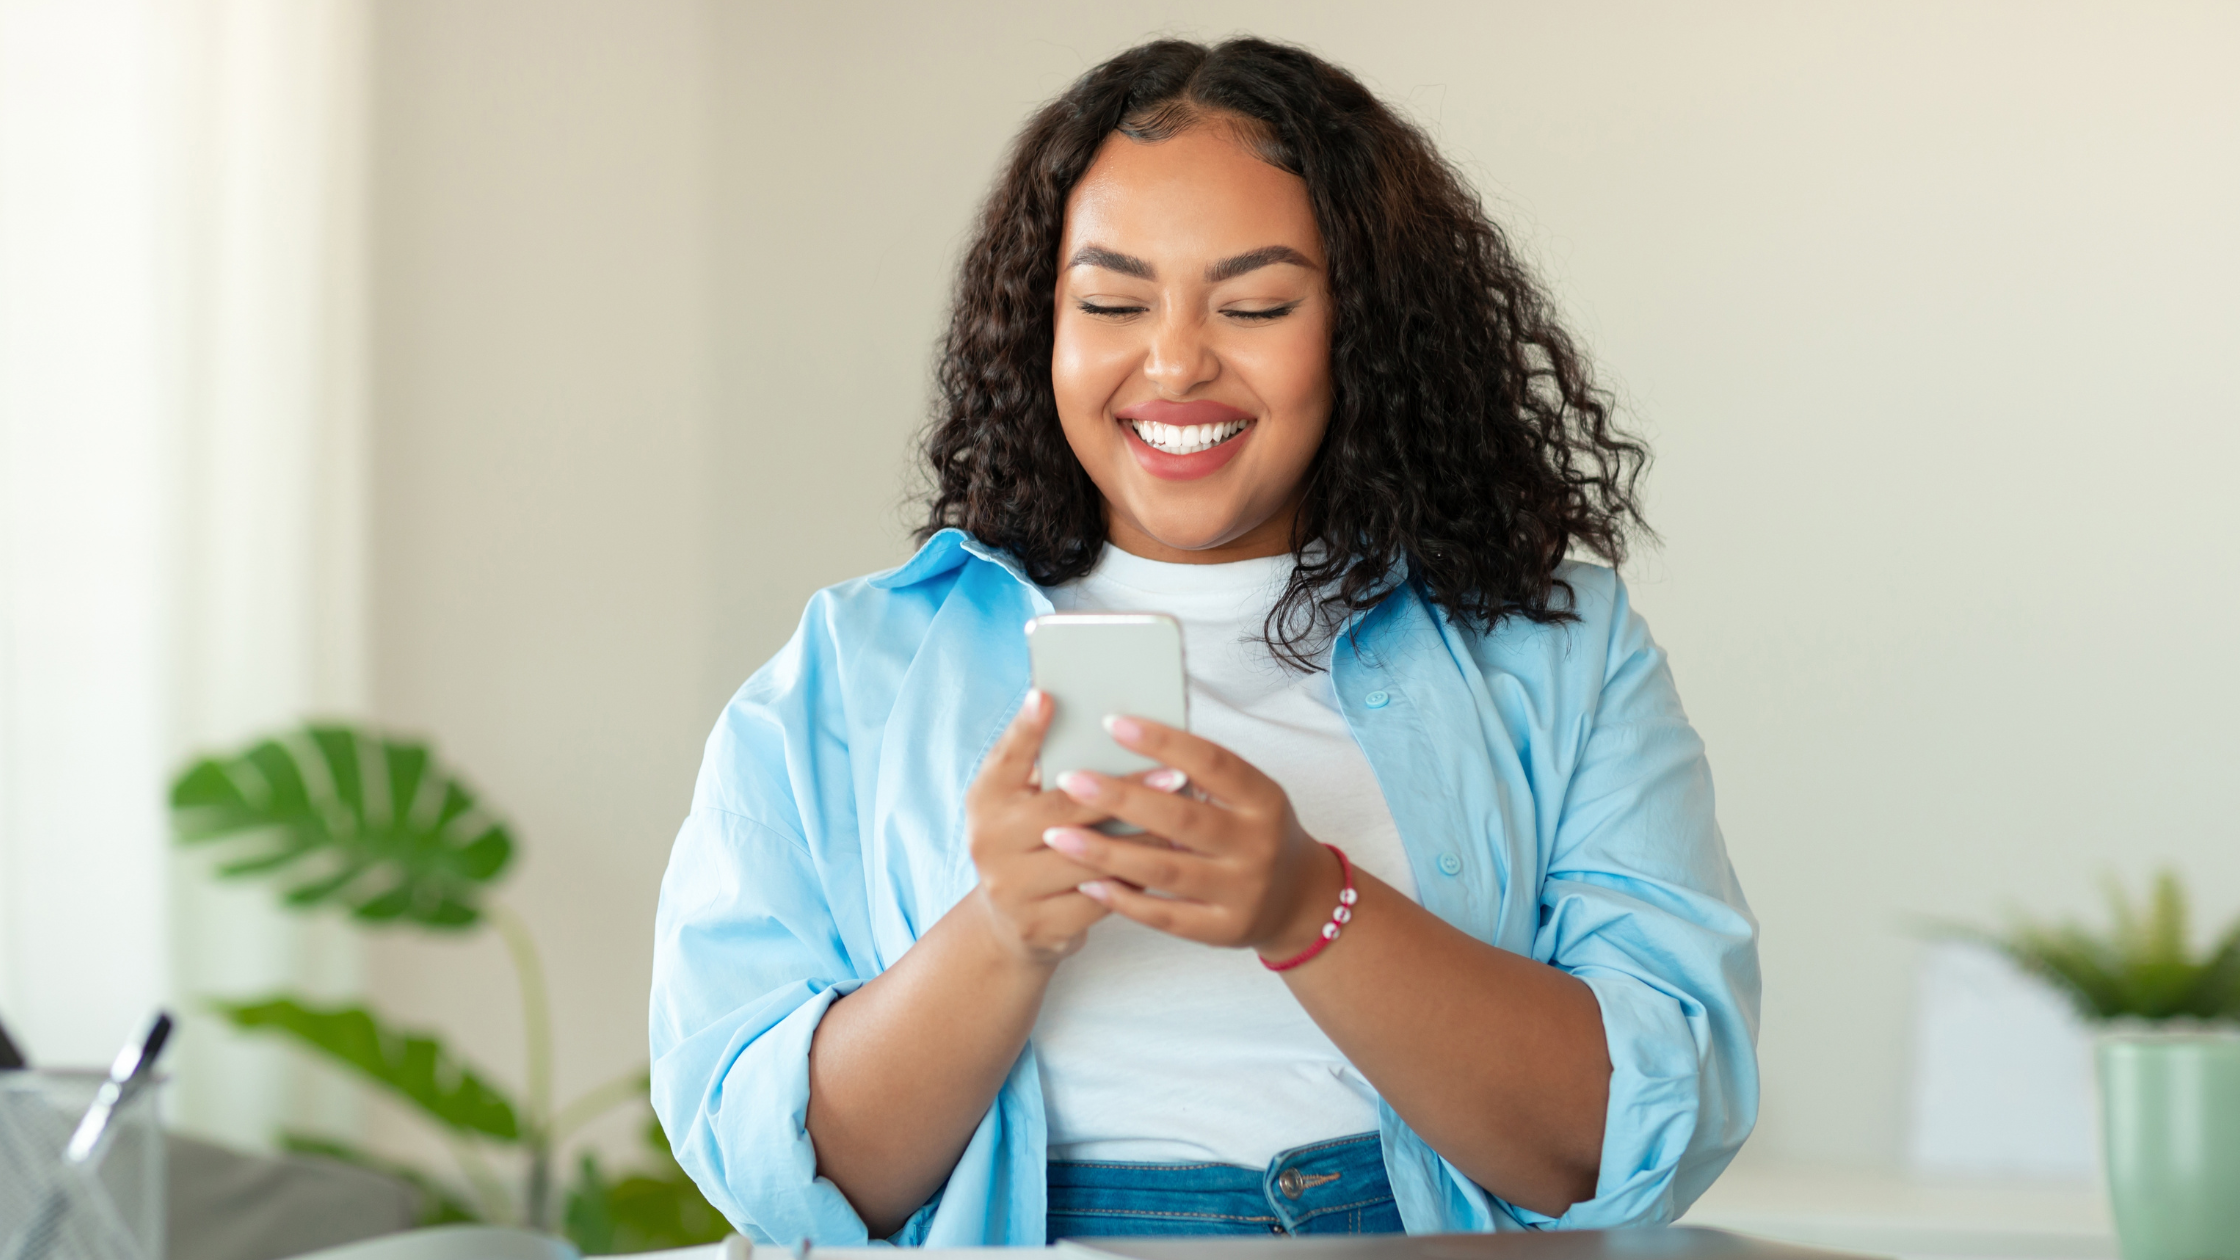 How to Sell Your Small Business with Confidence | Woman holding her phone smiling 